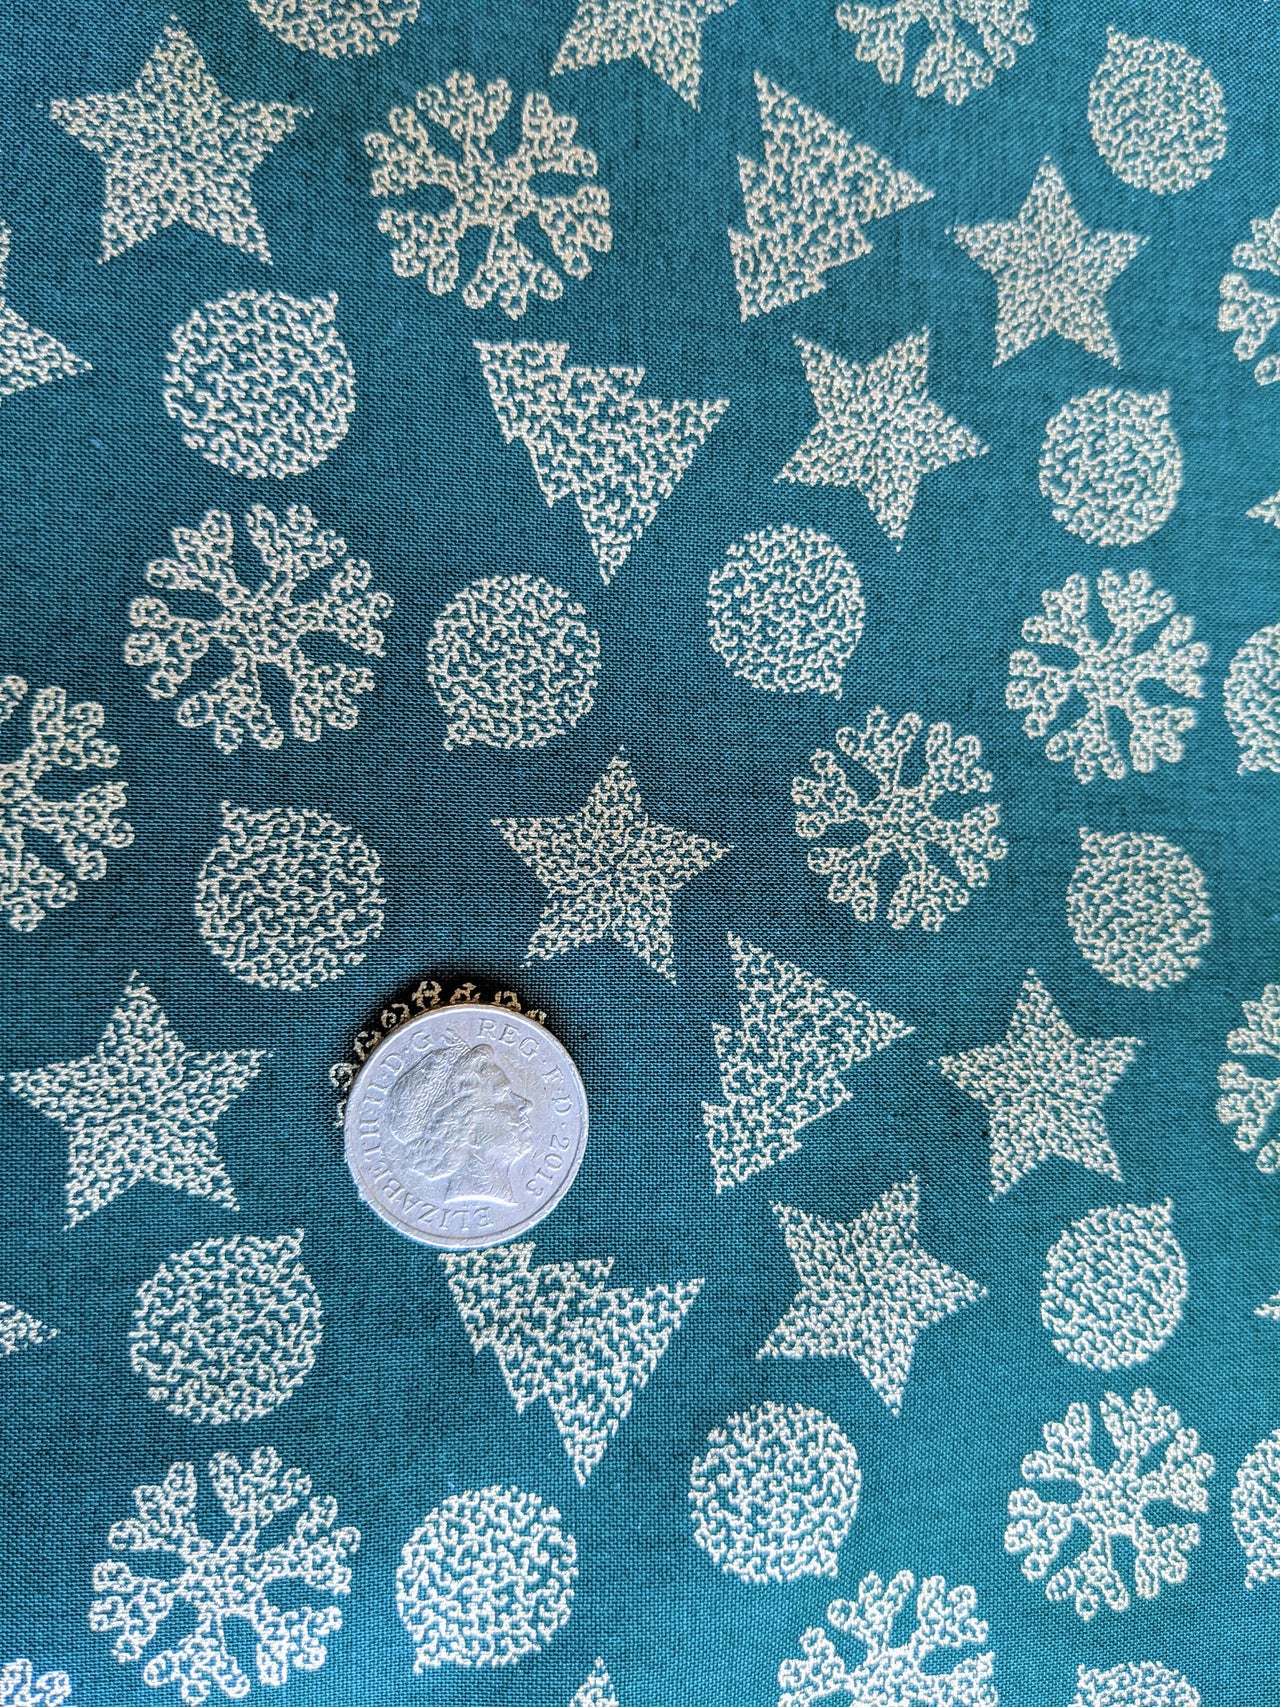 Bottle Green And Gold Cotton Fabric Christmas Snowflakes Xmas Tree Star Fabric, Festive Fabric, Holiday Fabric